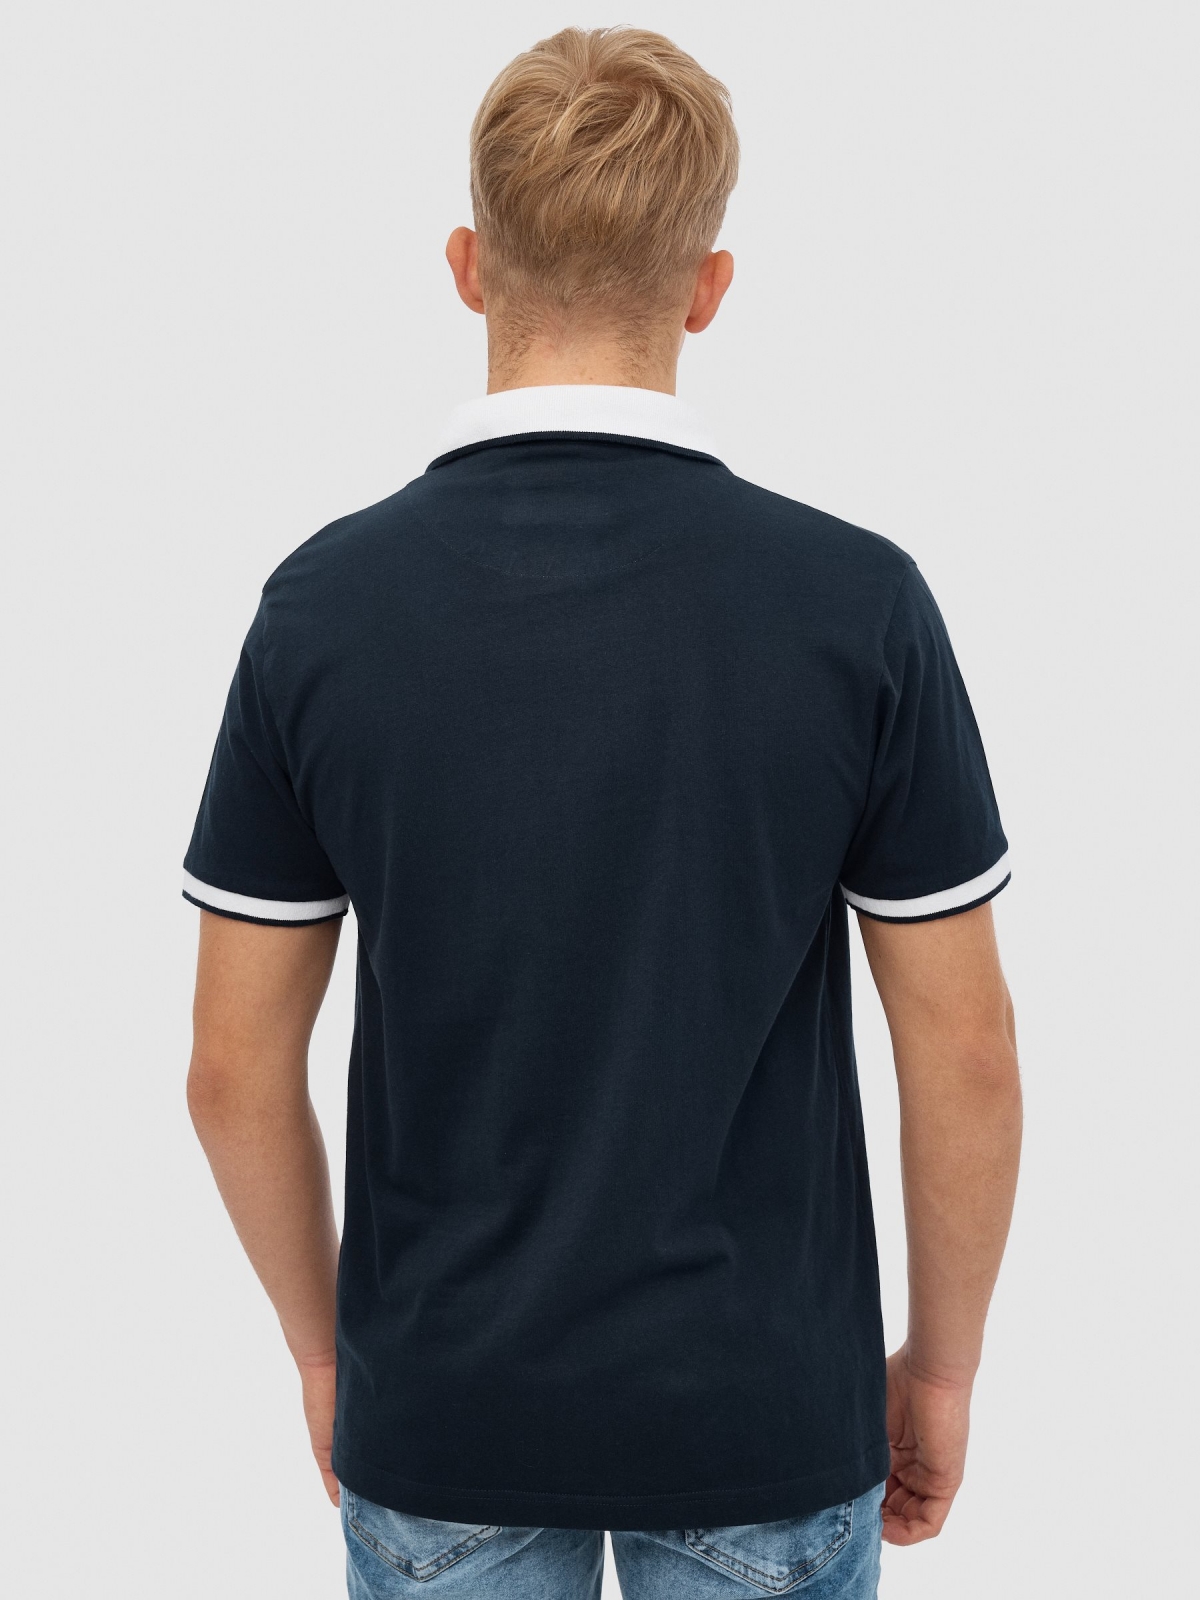 Basic polo shirt navy middle back view